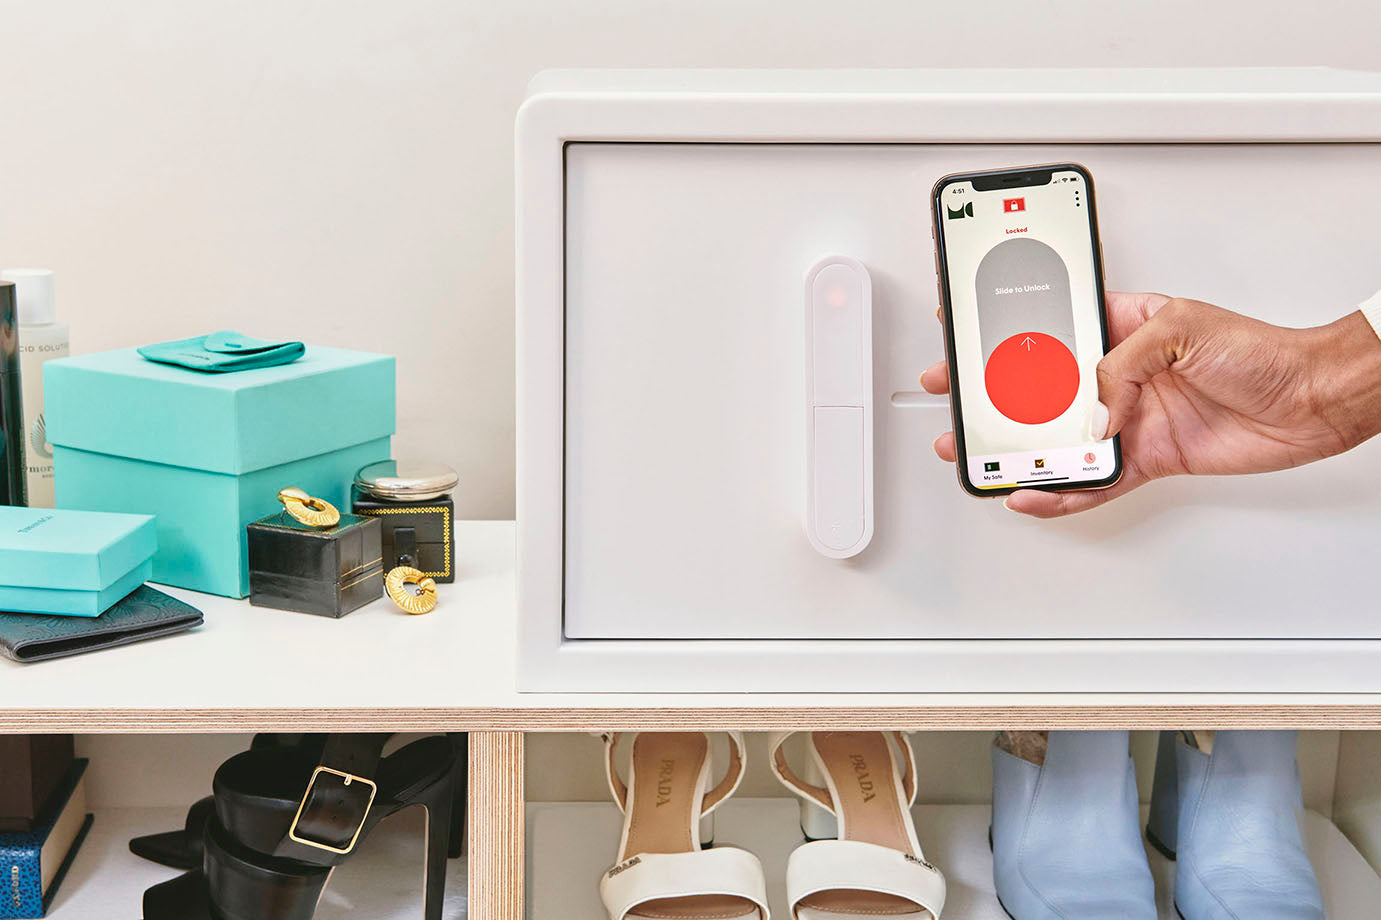 A white iCube sitting on top of a shelf with a hand holding a phone to show the iCube app. On the screen, the app is prompting them to slide to unlock the safe.